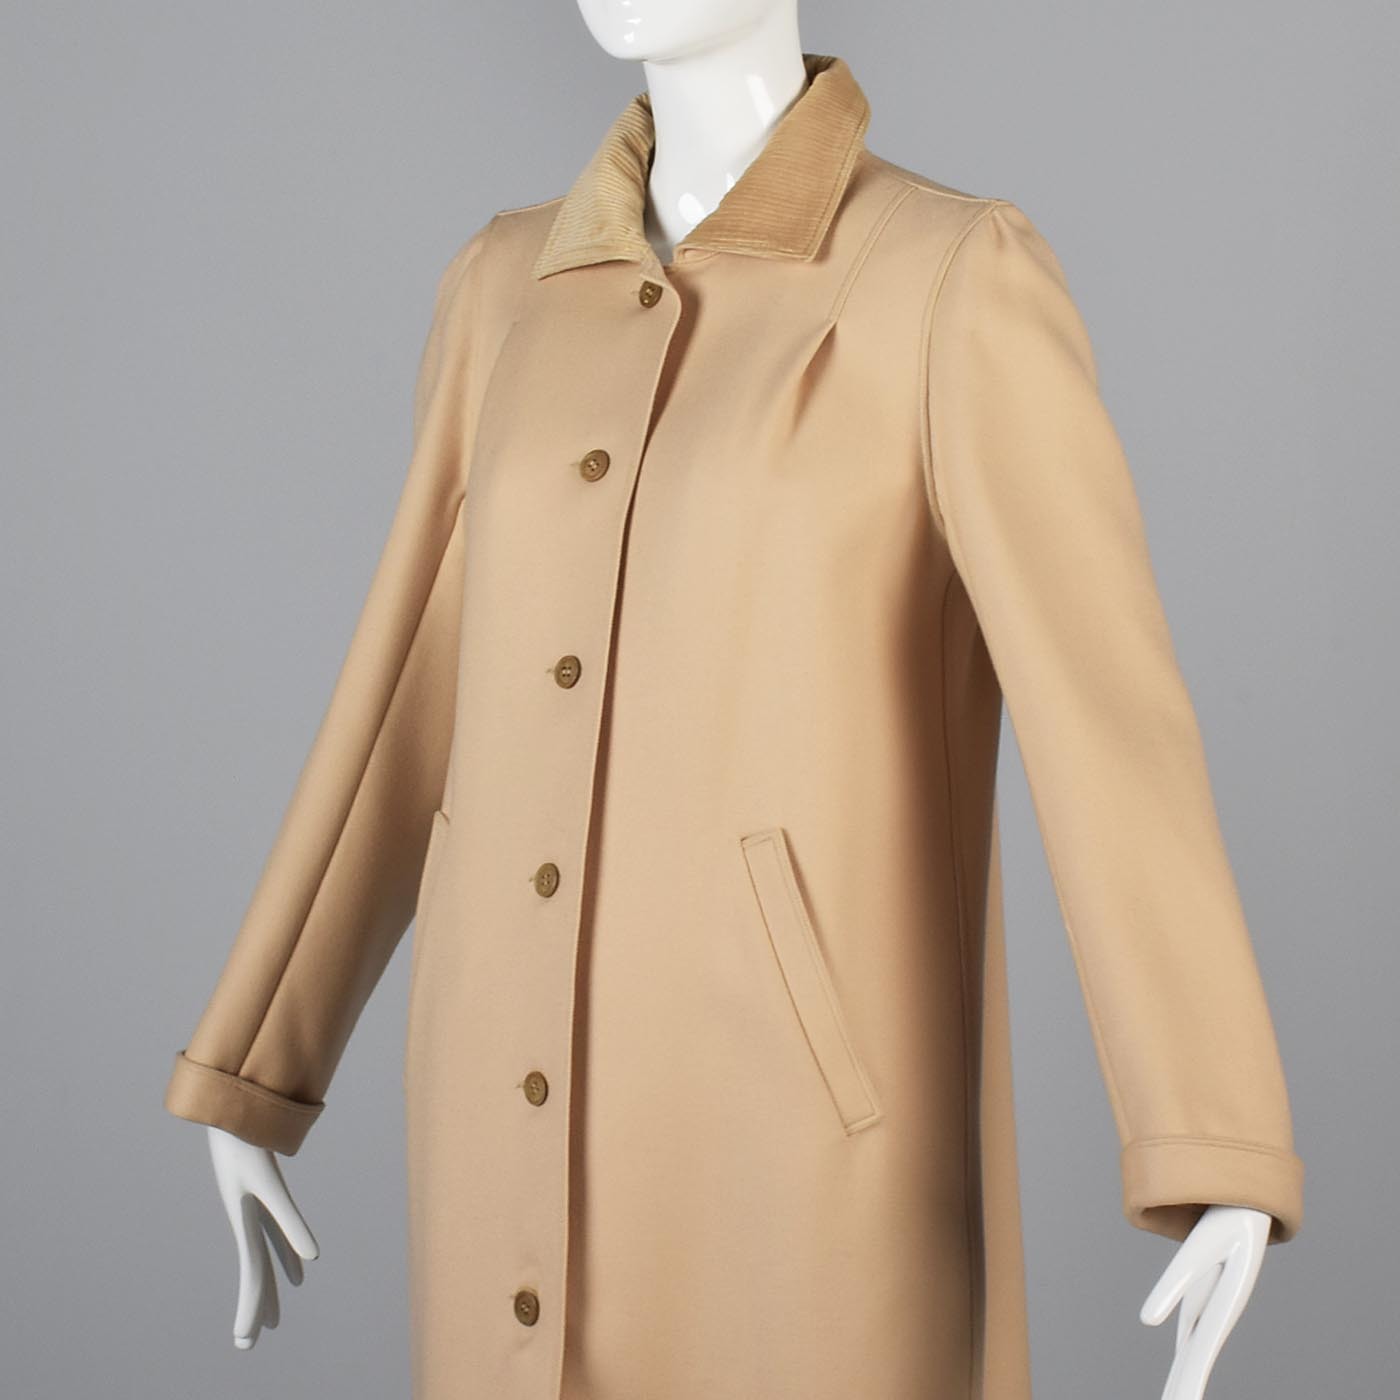 1970s Courreges Camel Coat and Skirt Set with Button Details